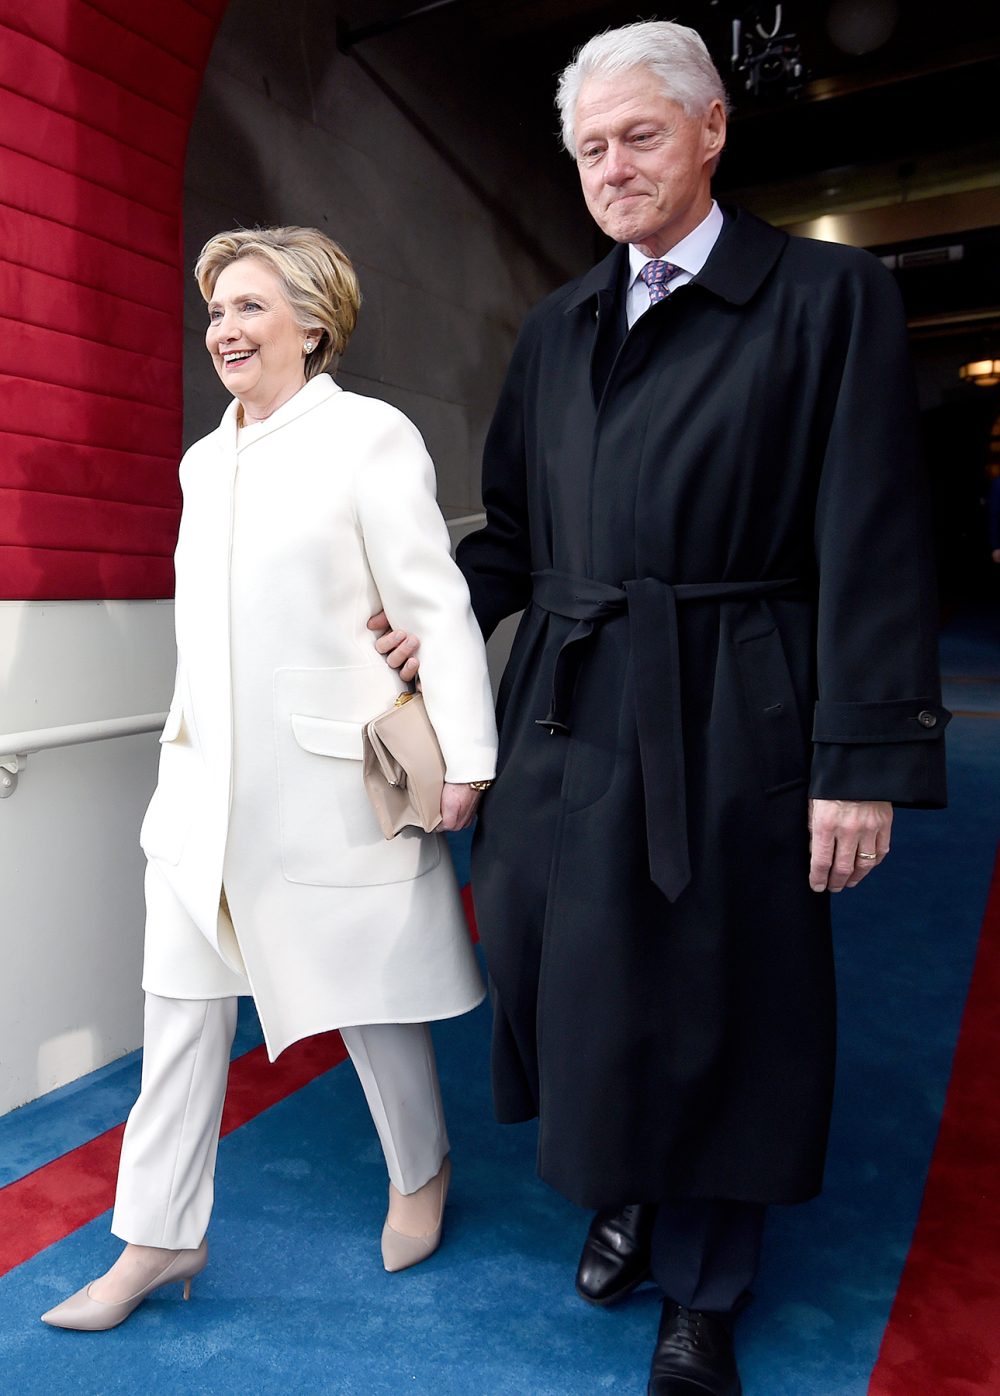 Former US President Bill Clinton and First Lady Hillary Clinton arrive for the Presidential Inauguration of Donald Trump at the US Capitol on January 20, 2017 in Washington, DC.